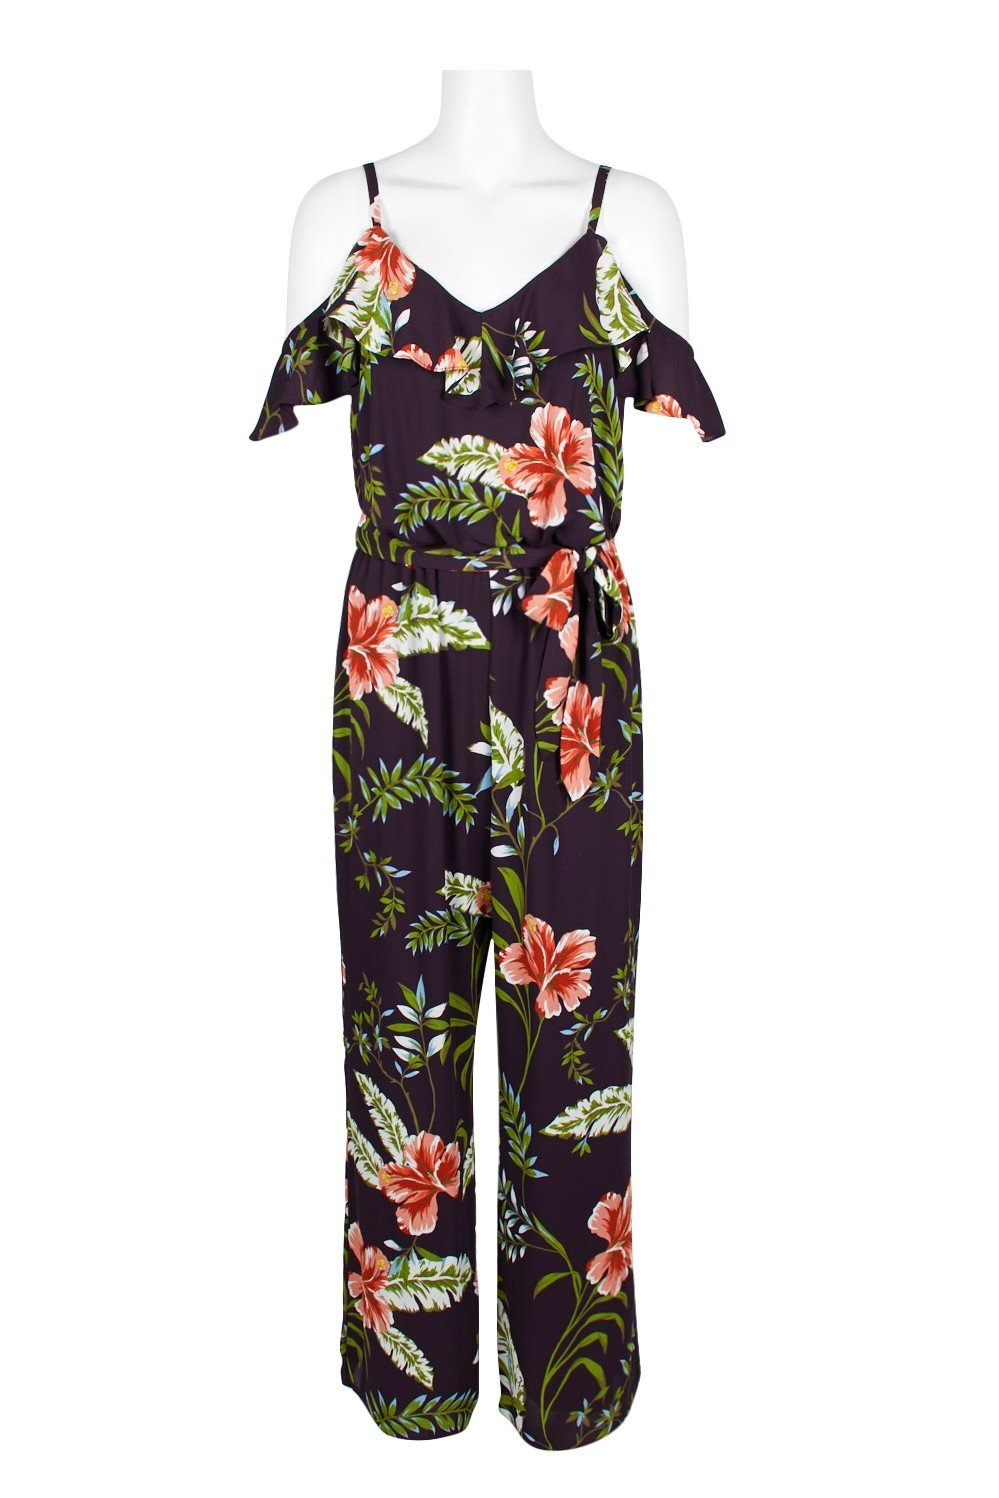 Adrianna Papell - AP1D103372 Floral Print V-neck Jumpsuit In Purple and Multi-Color